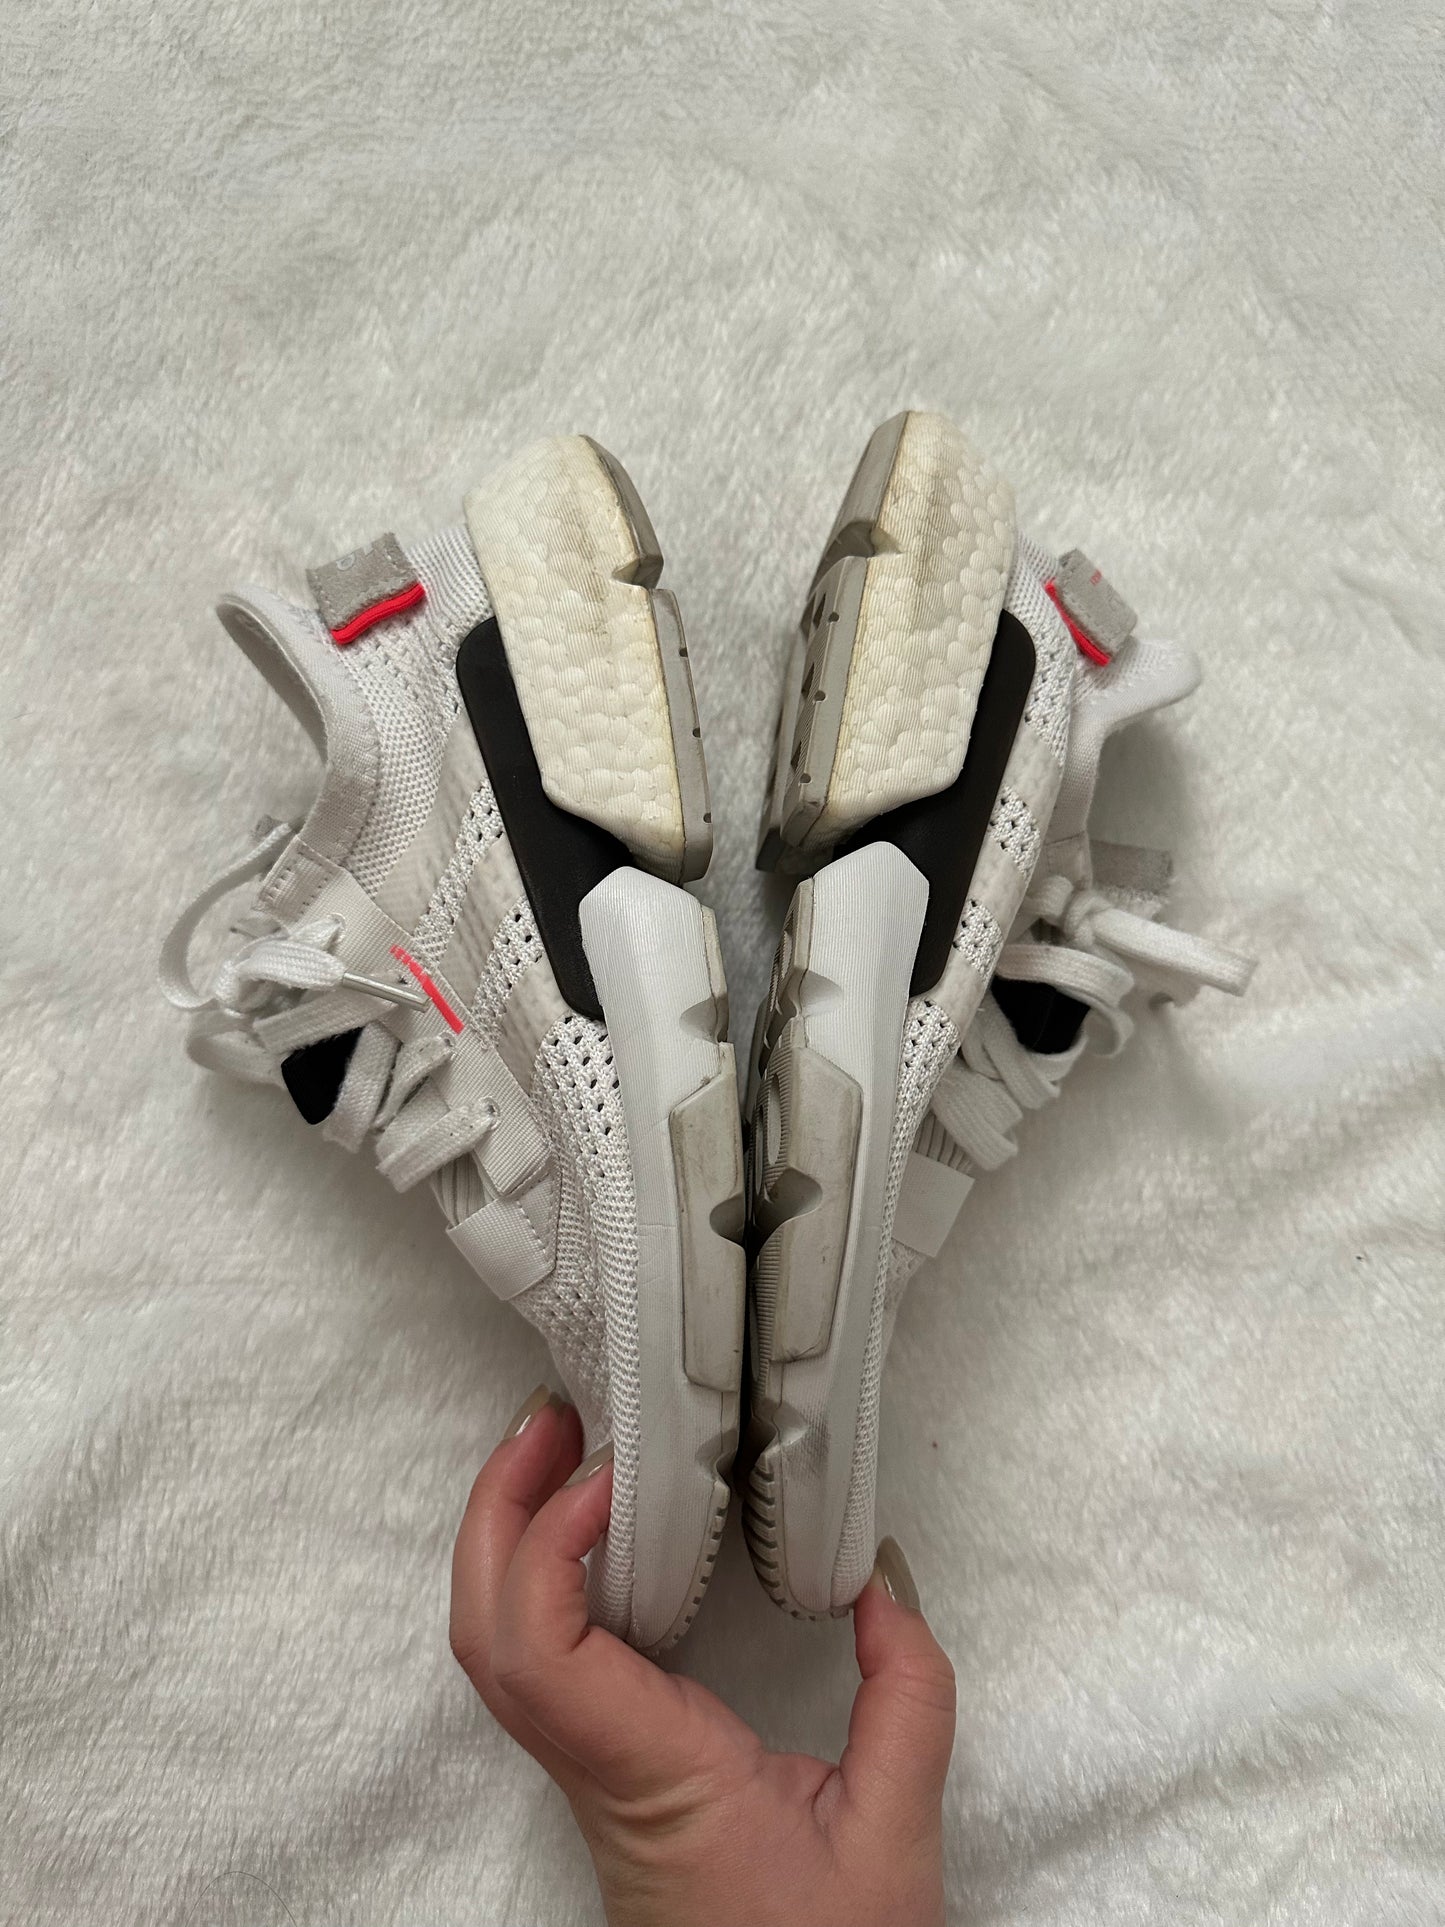 Adidas POD S3.1 Sneakers